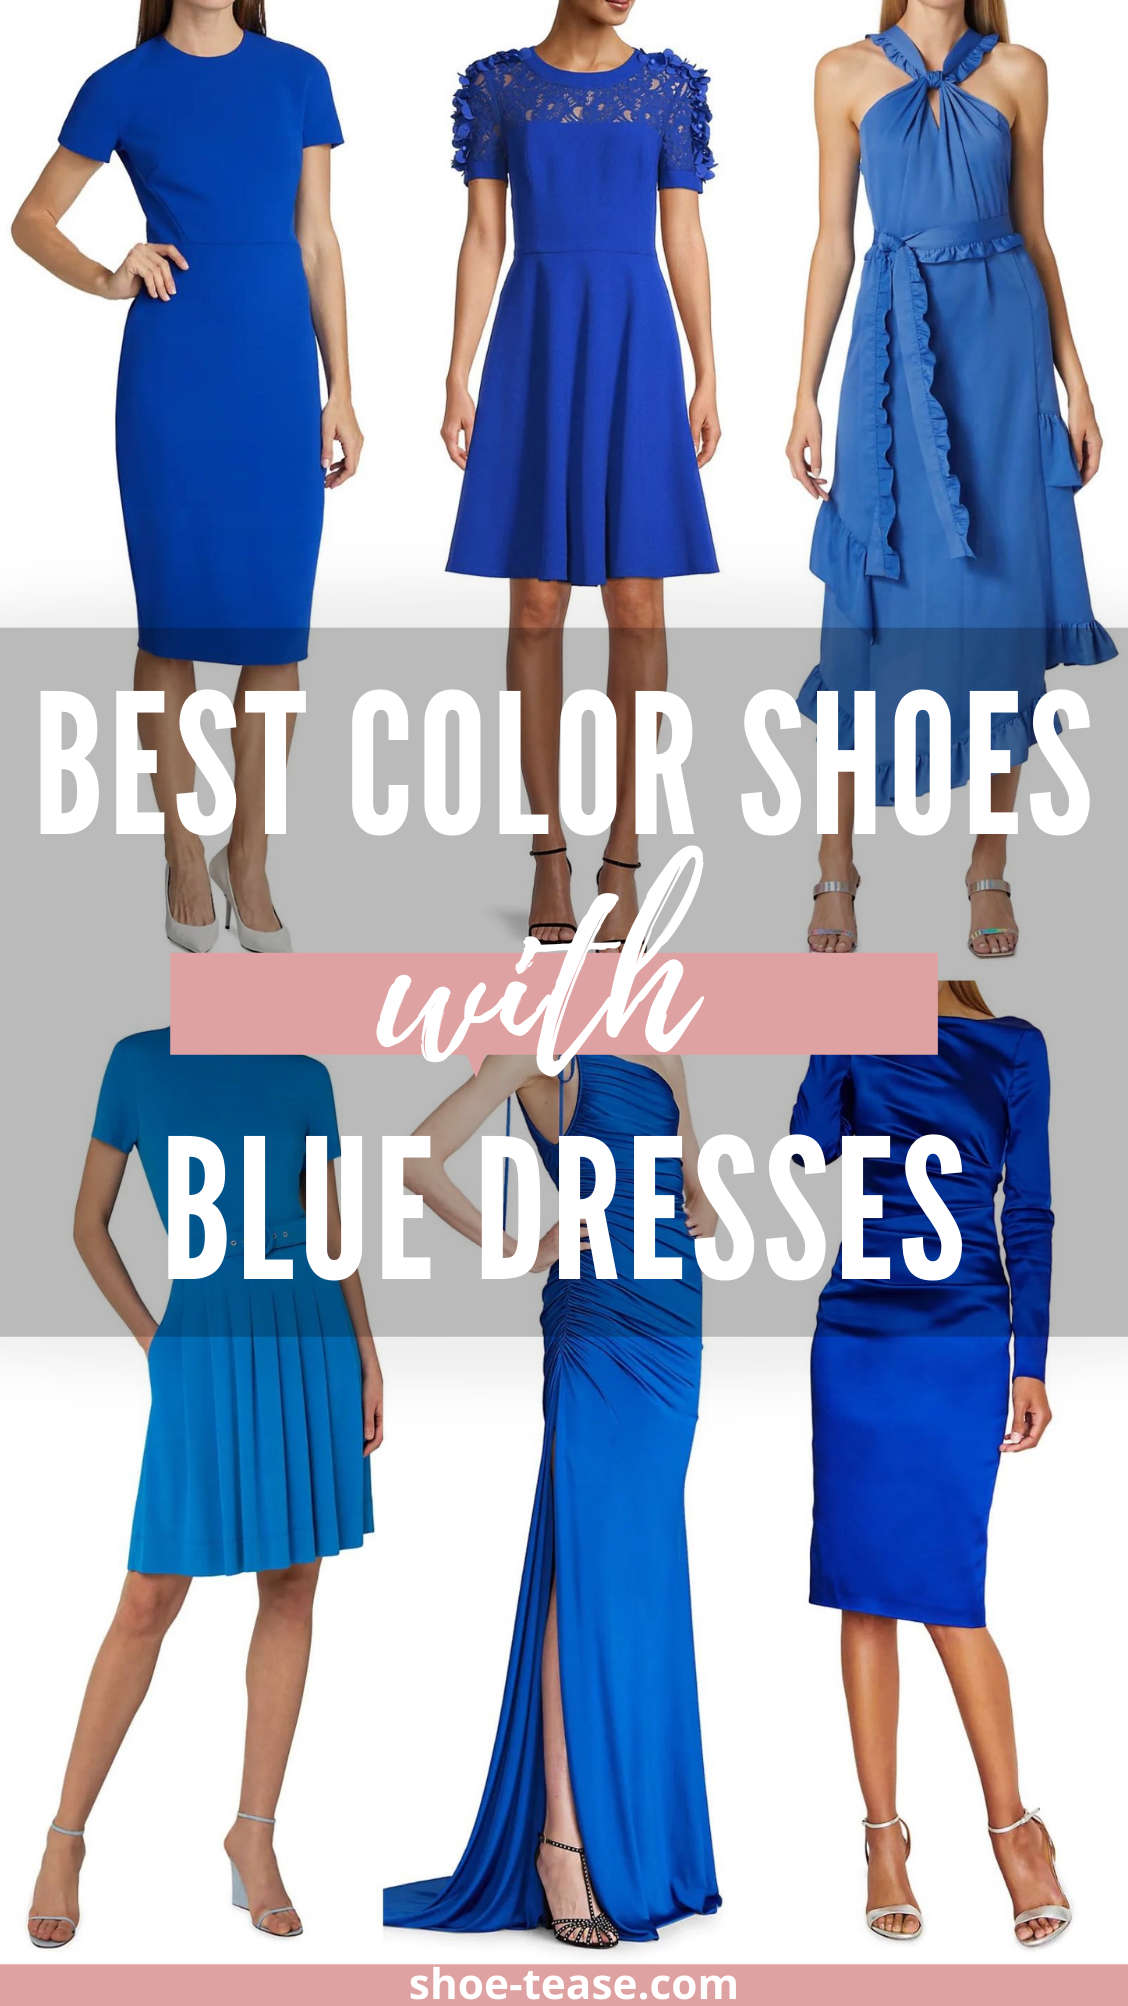 Text reading Best color shoes with blue dresses over image of 6 women wearing various blue dresses.